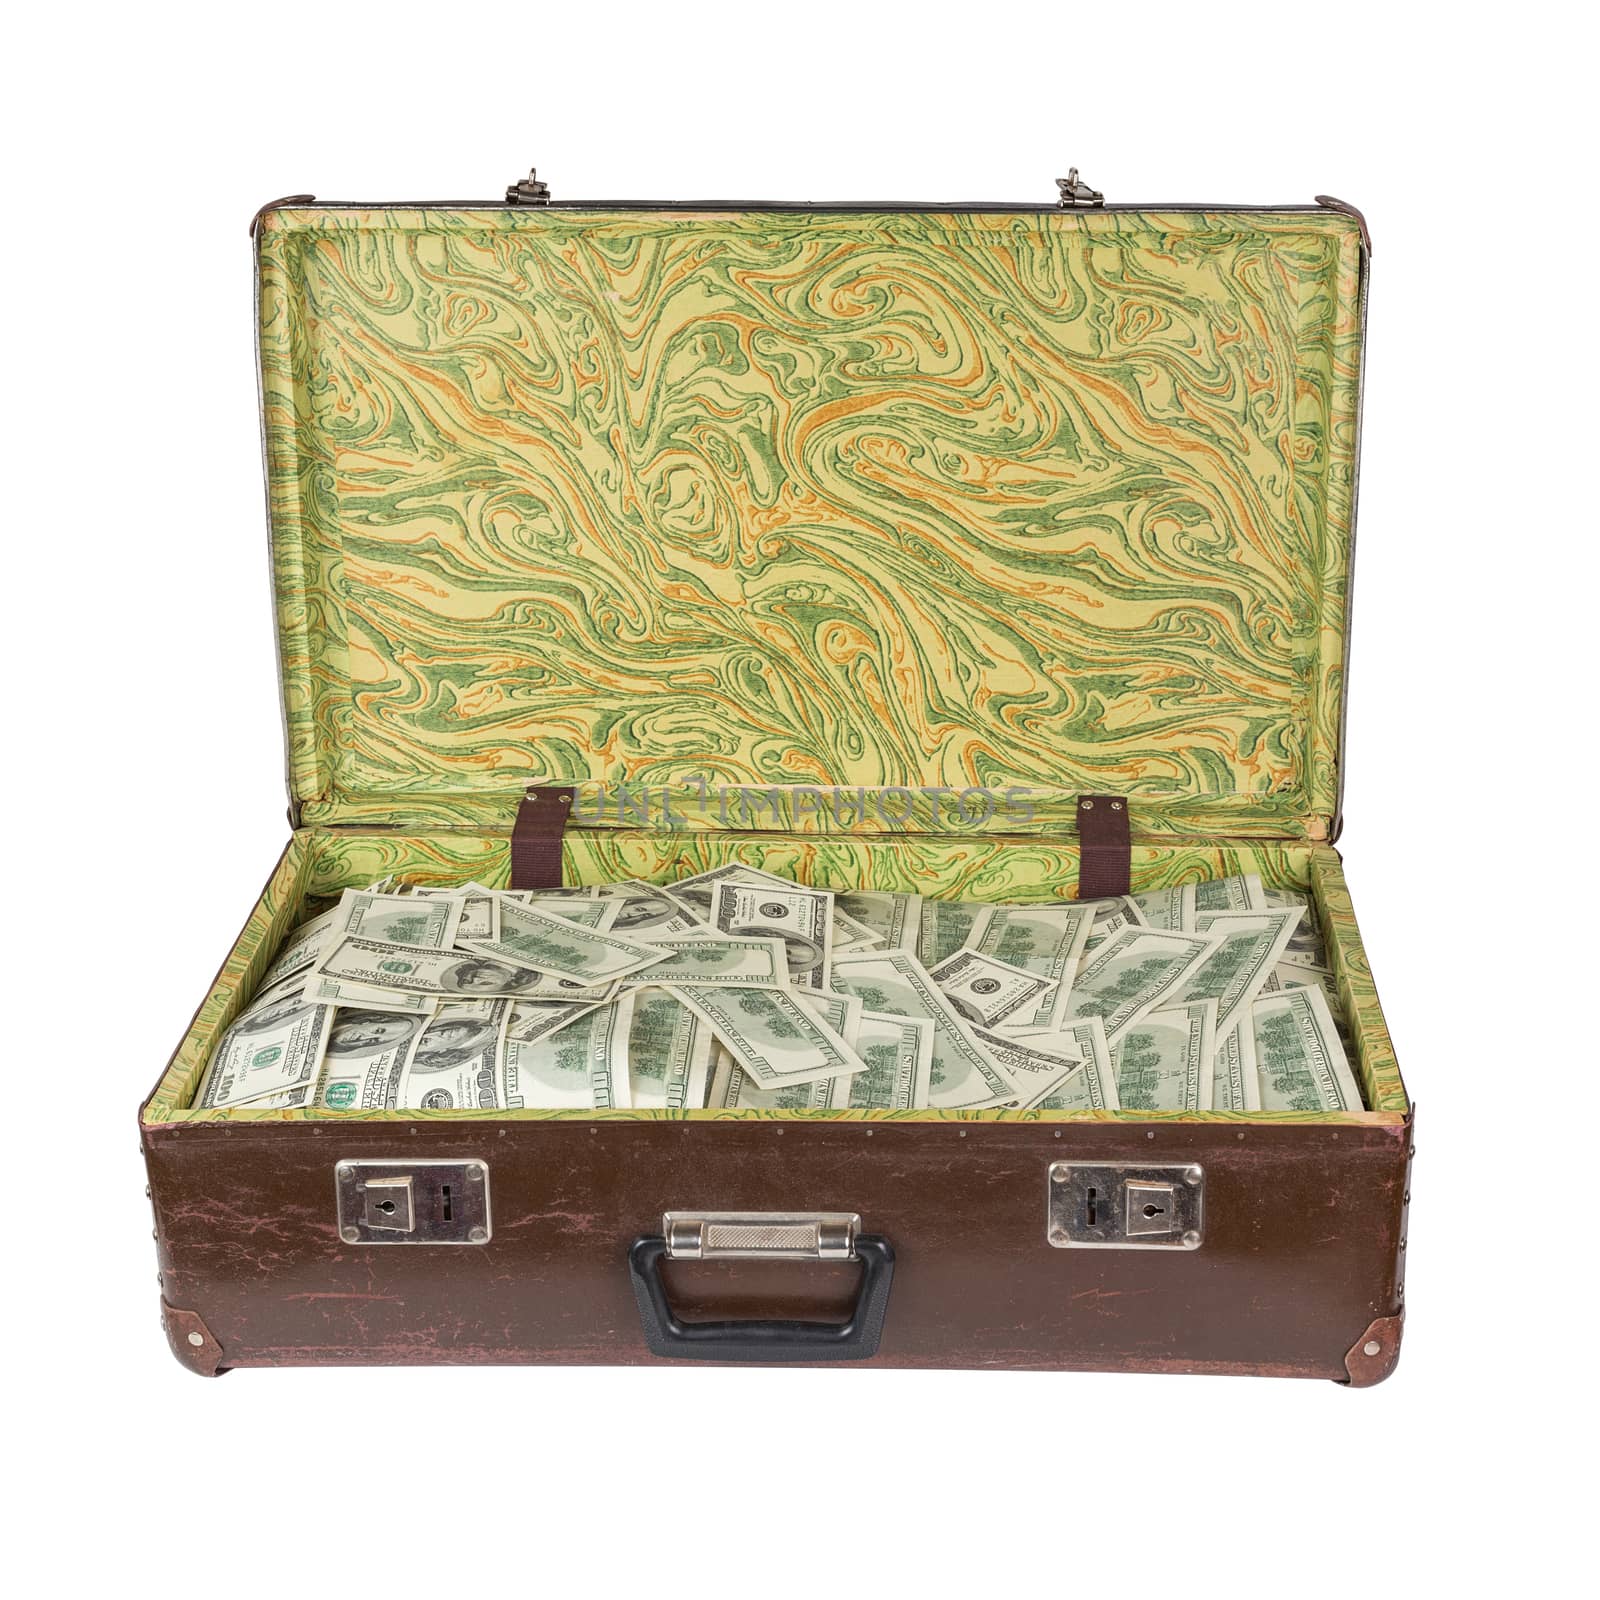 old opened brown suitcase full of hundred dollar banknotes isolated on white background.